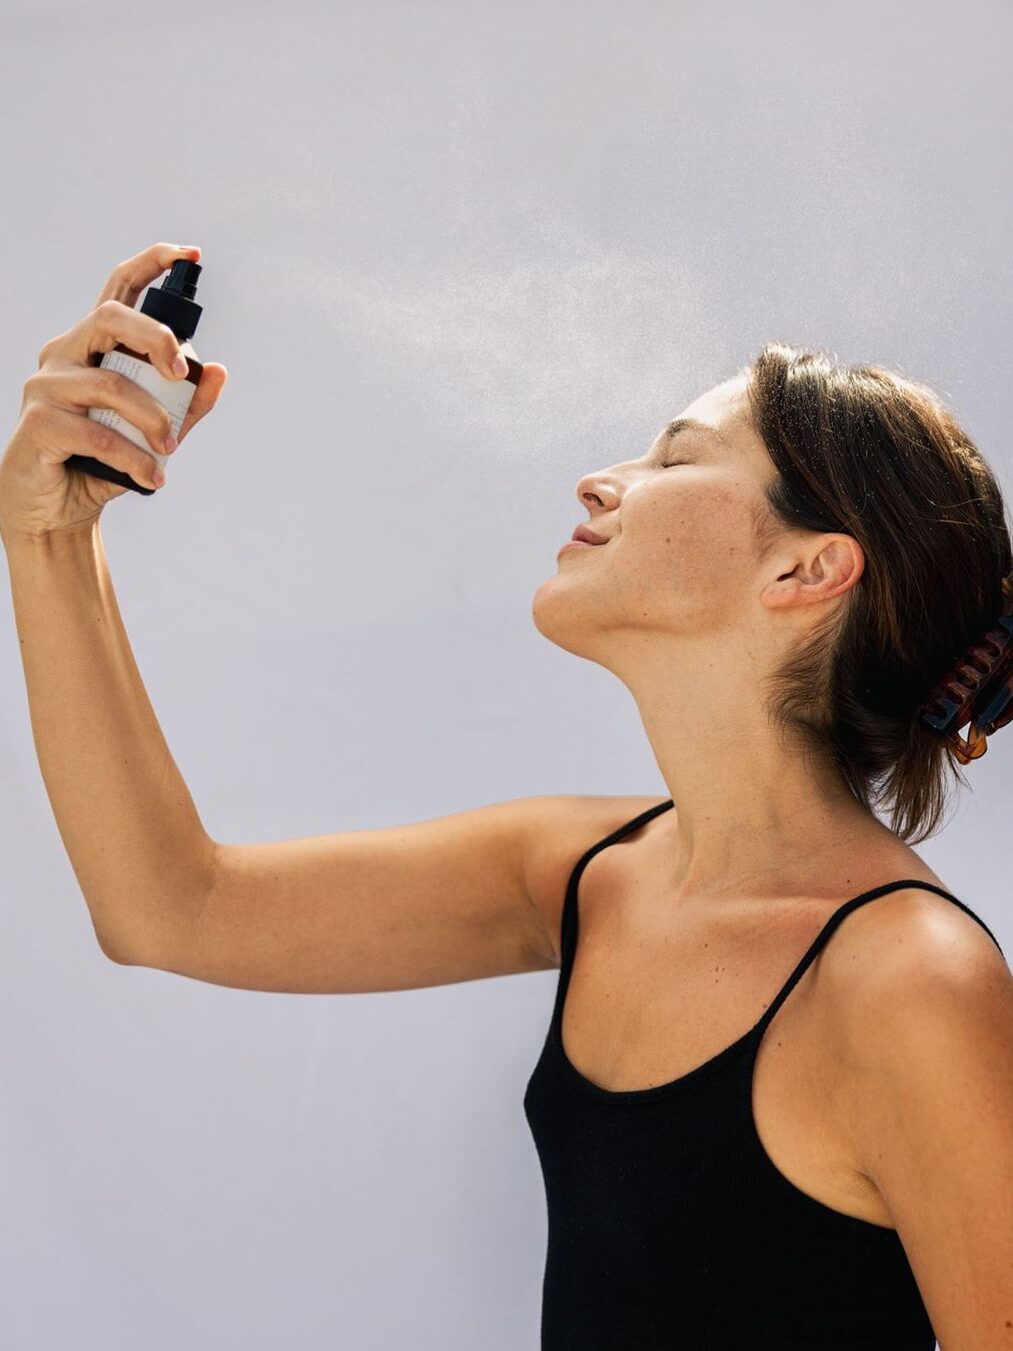 The side profile of a woman with short hair and a black tank top spraying Primally Pure's Everything Spray on her face.